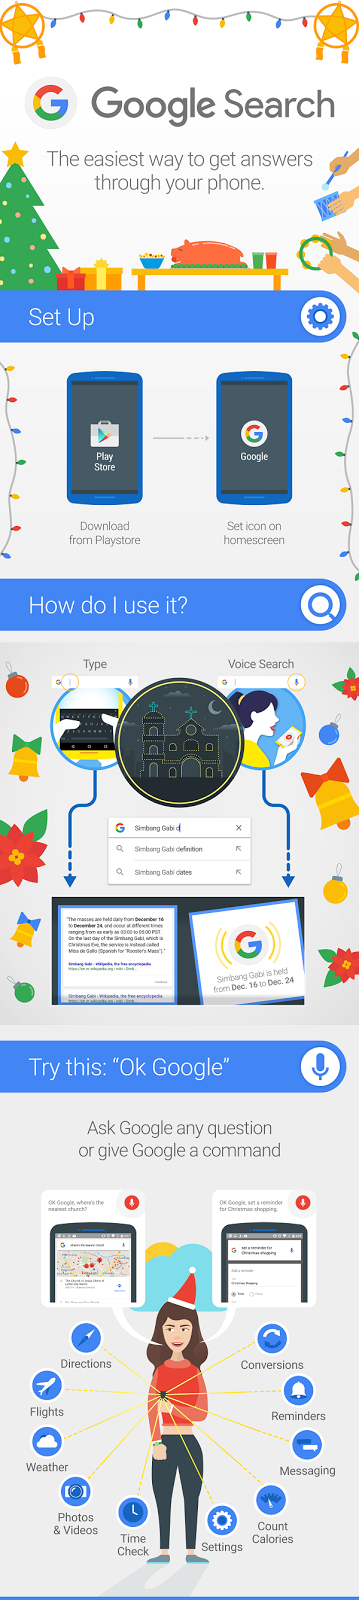 Google Apps Infographic - Search